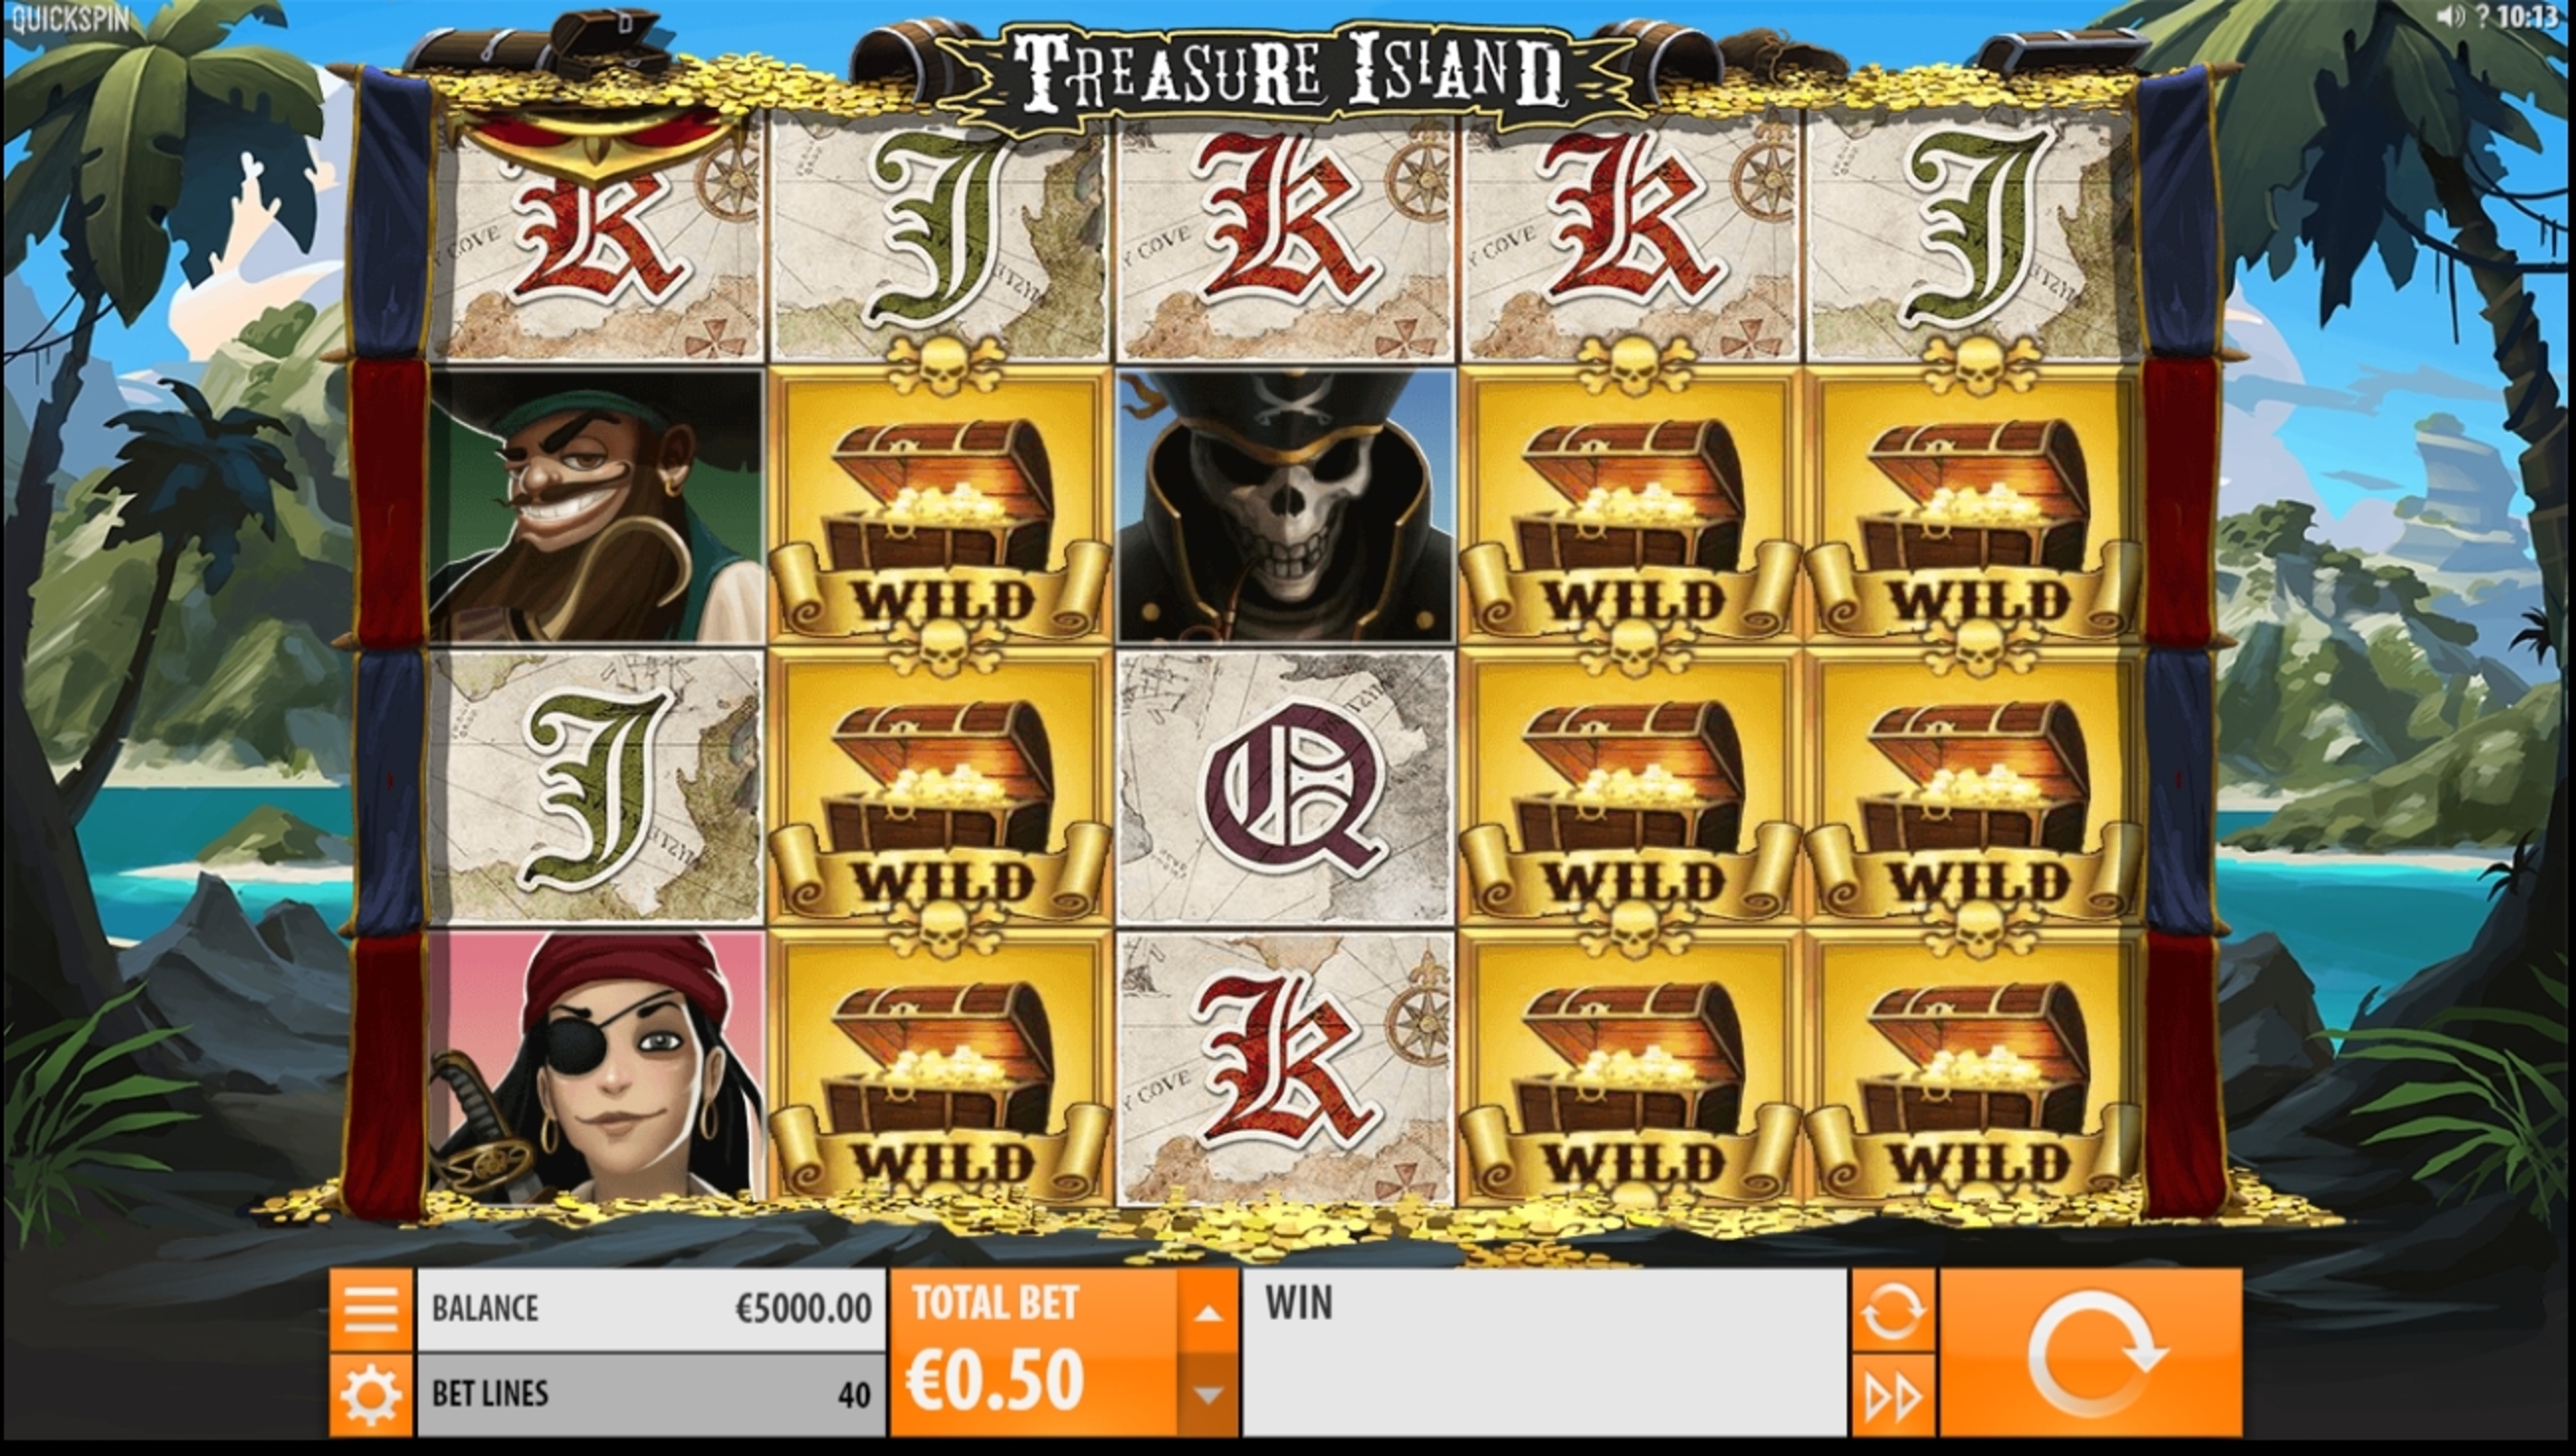 Reels in Treasure Island Slot Game by Quickspin